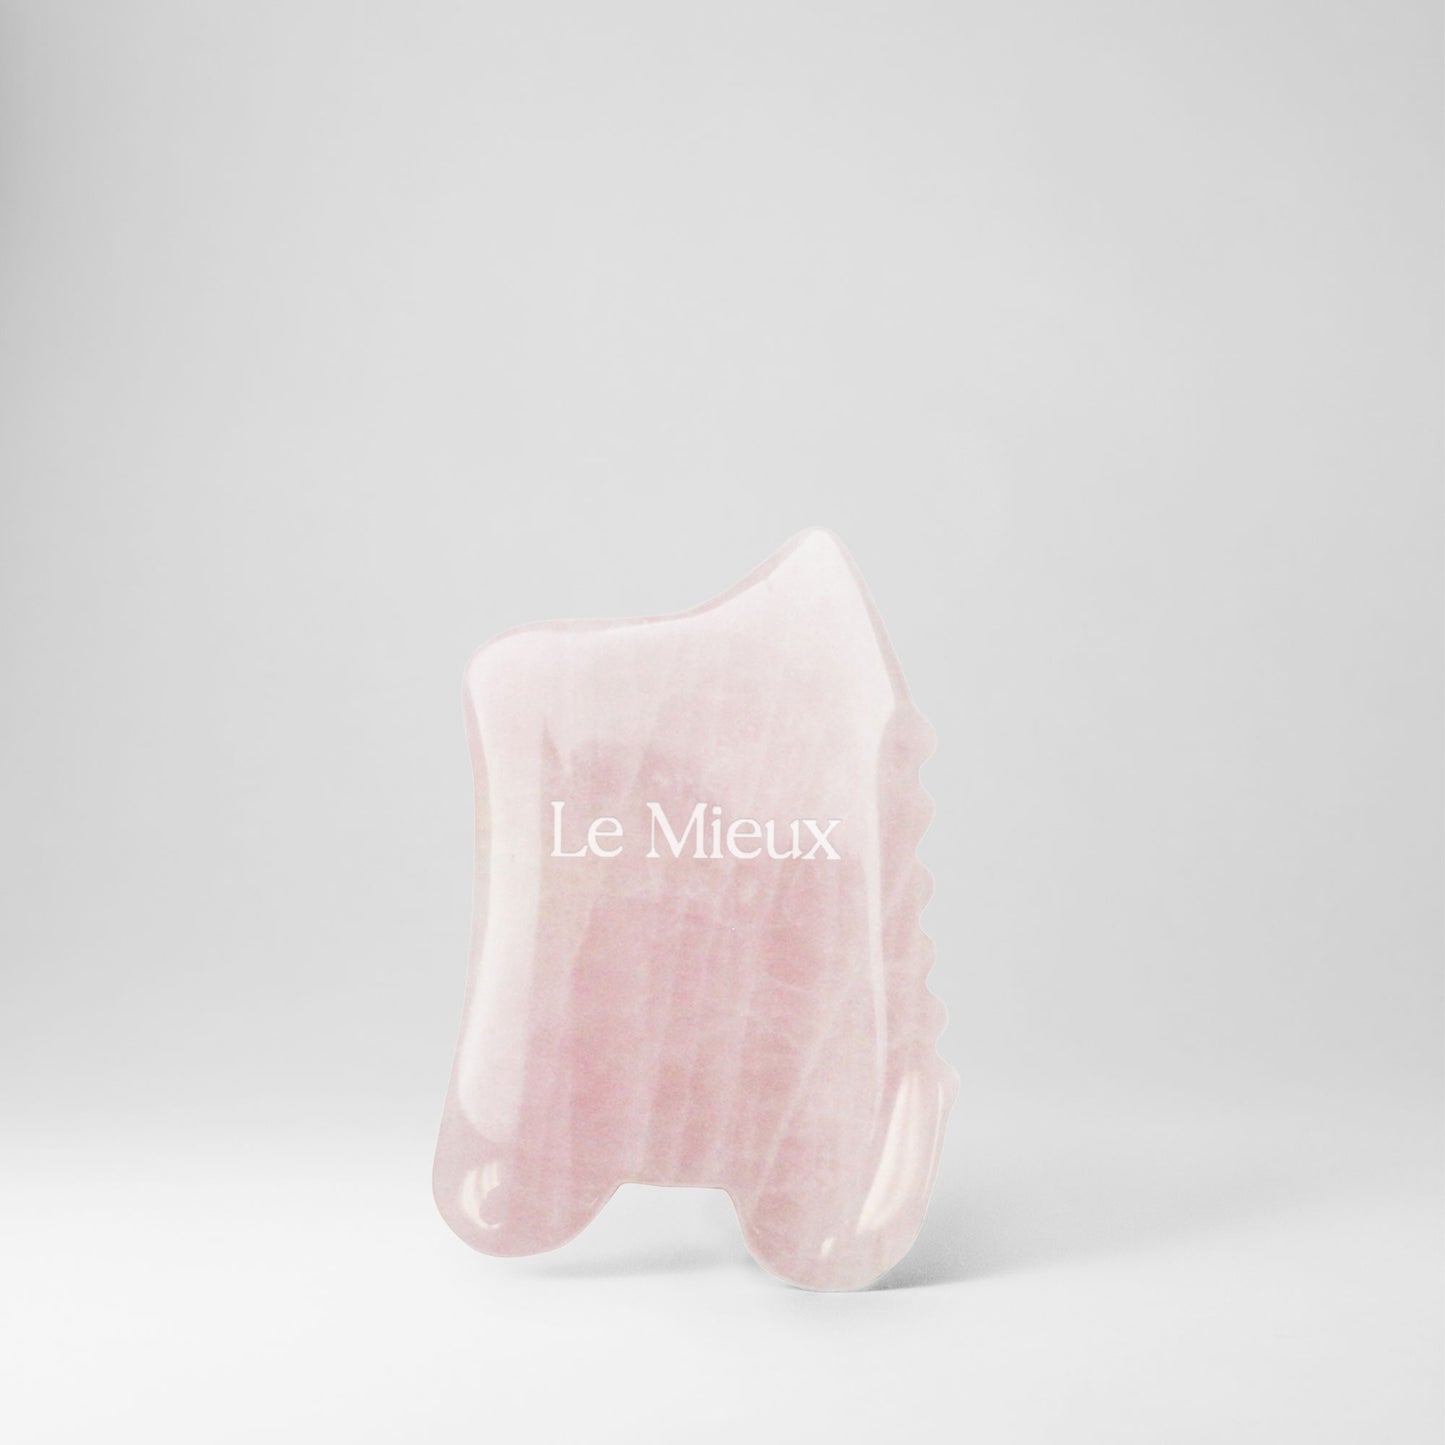 Light pink Gua Sha with "Le Mieux" on it isolated on a light grey background 